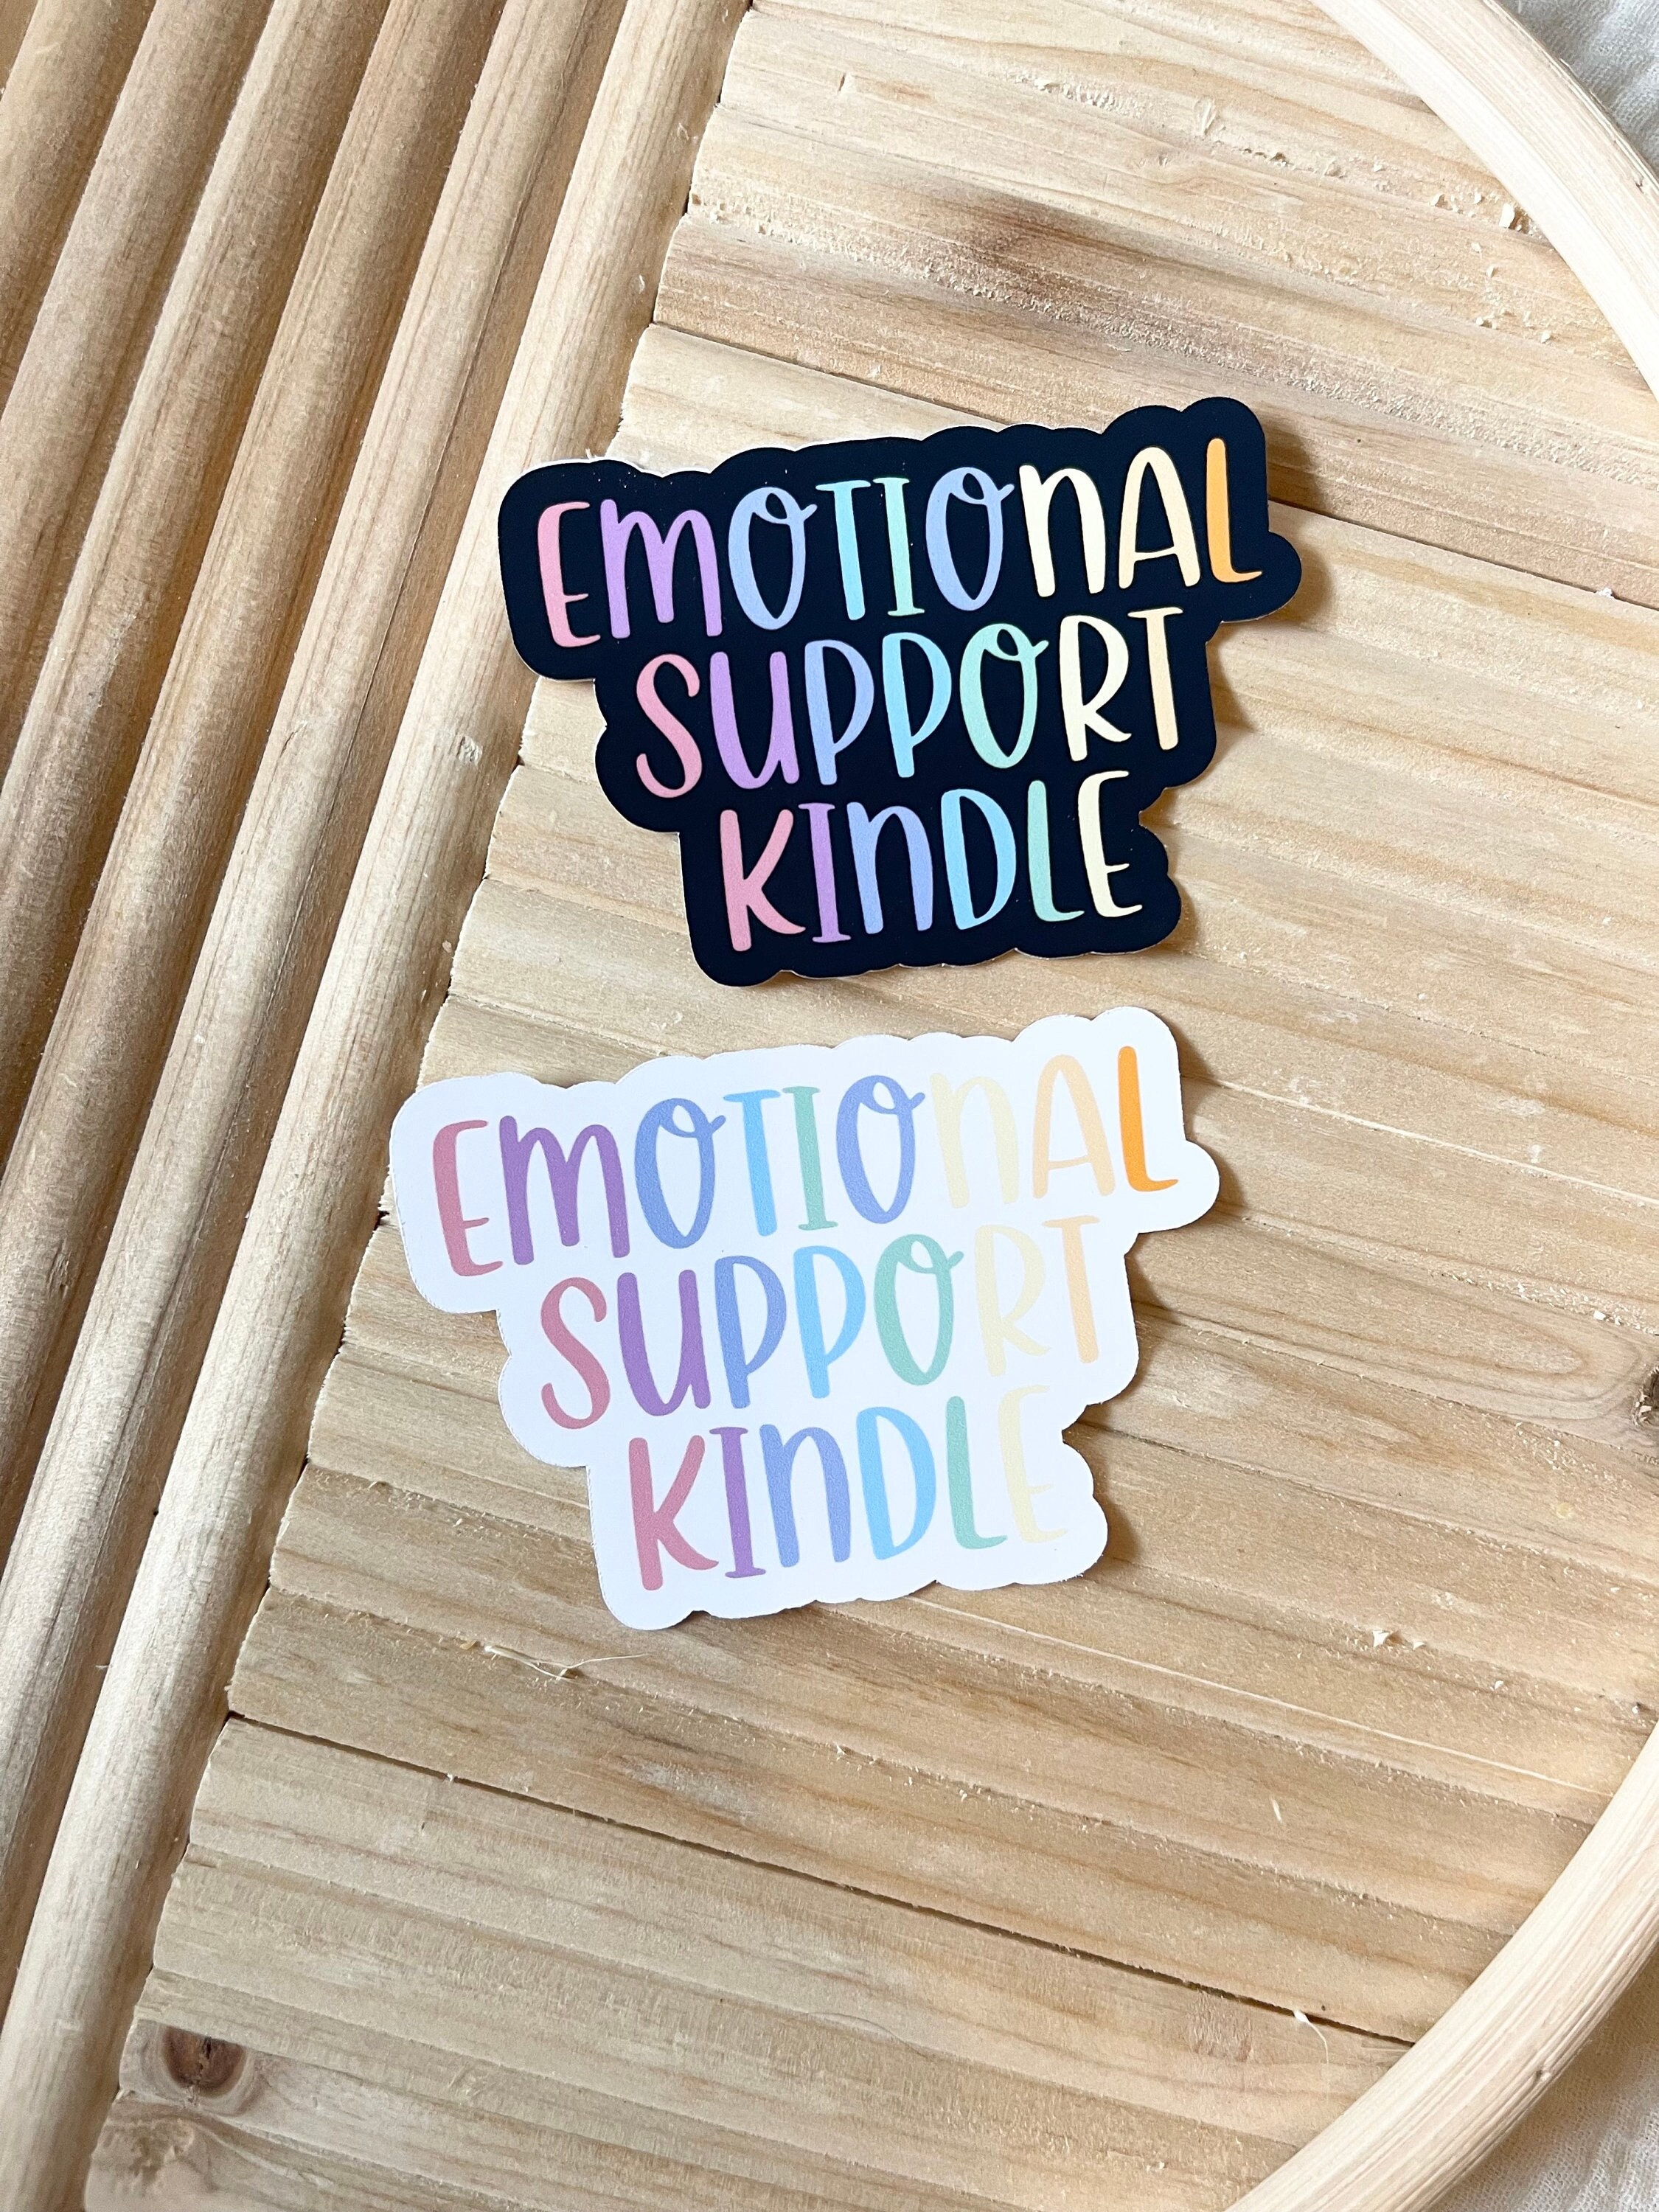 Rainbow Heart Sticker Emotional Support, Quote, bookish kindle sticker